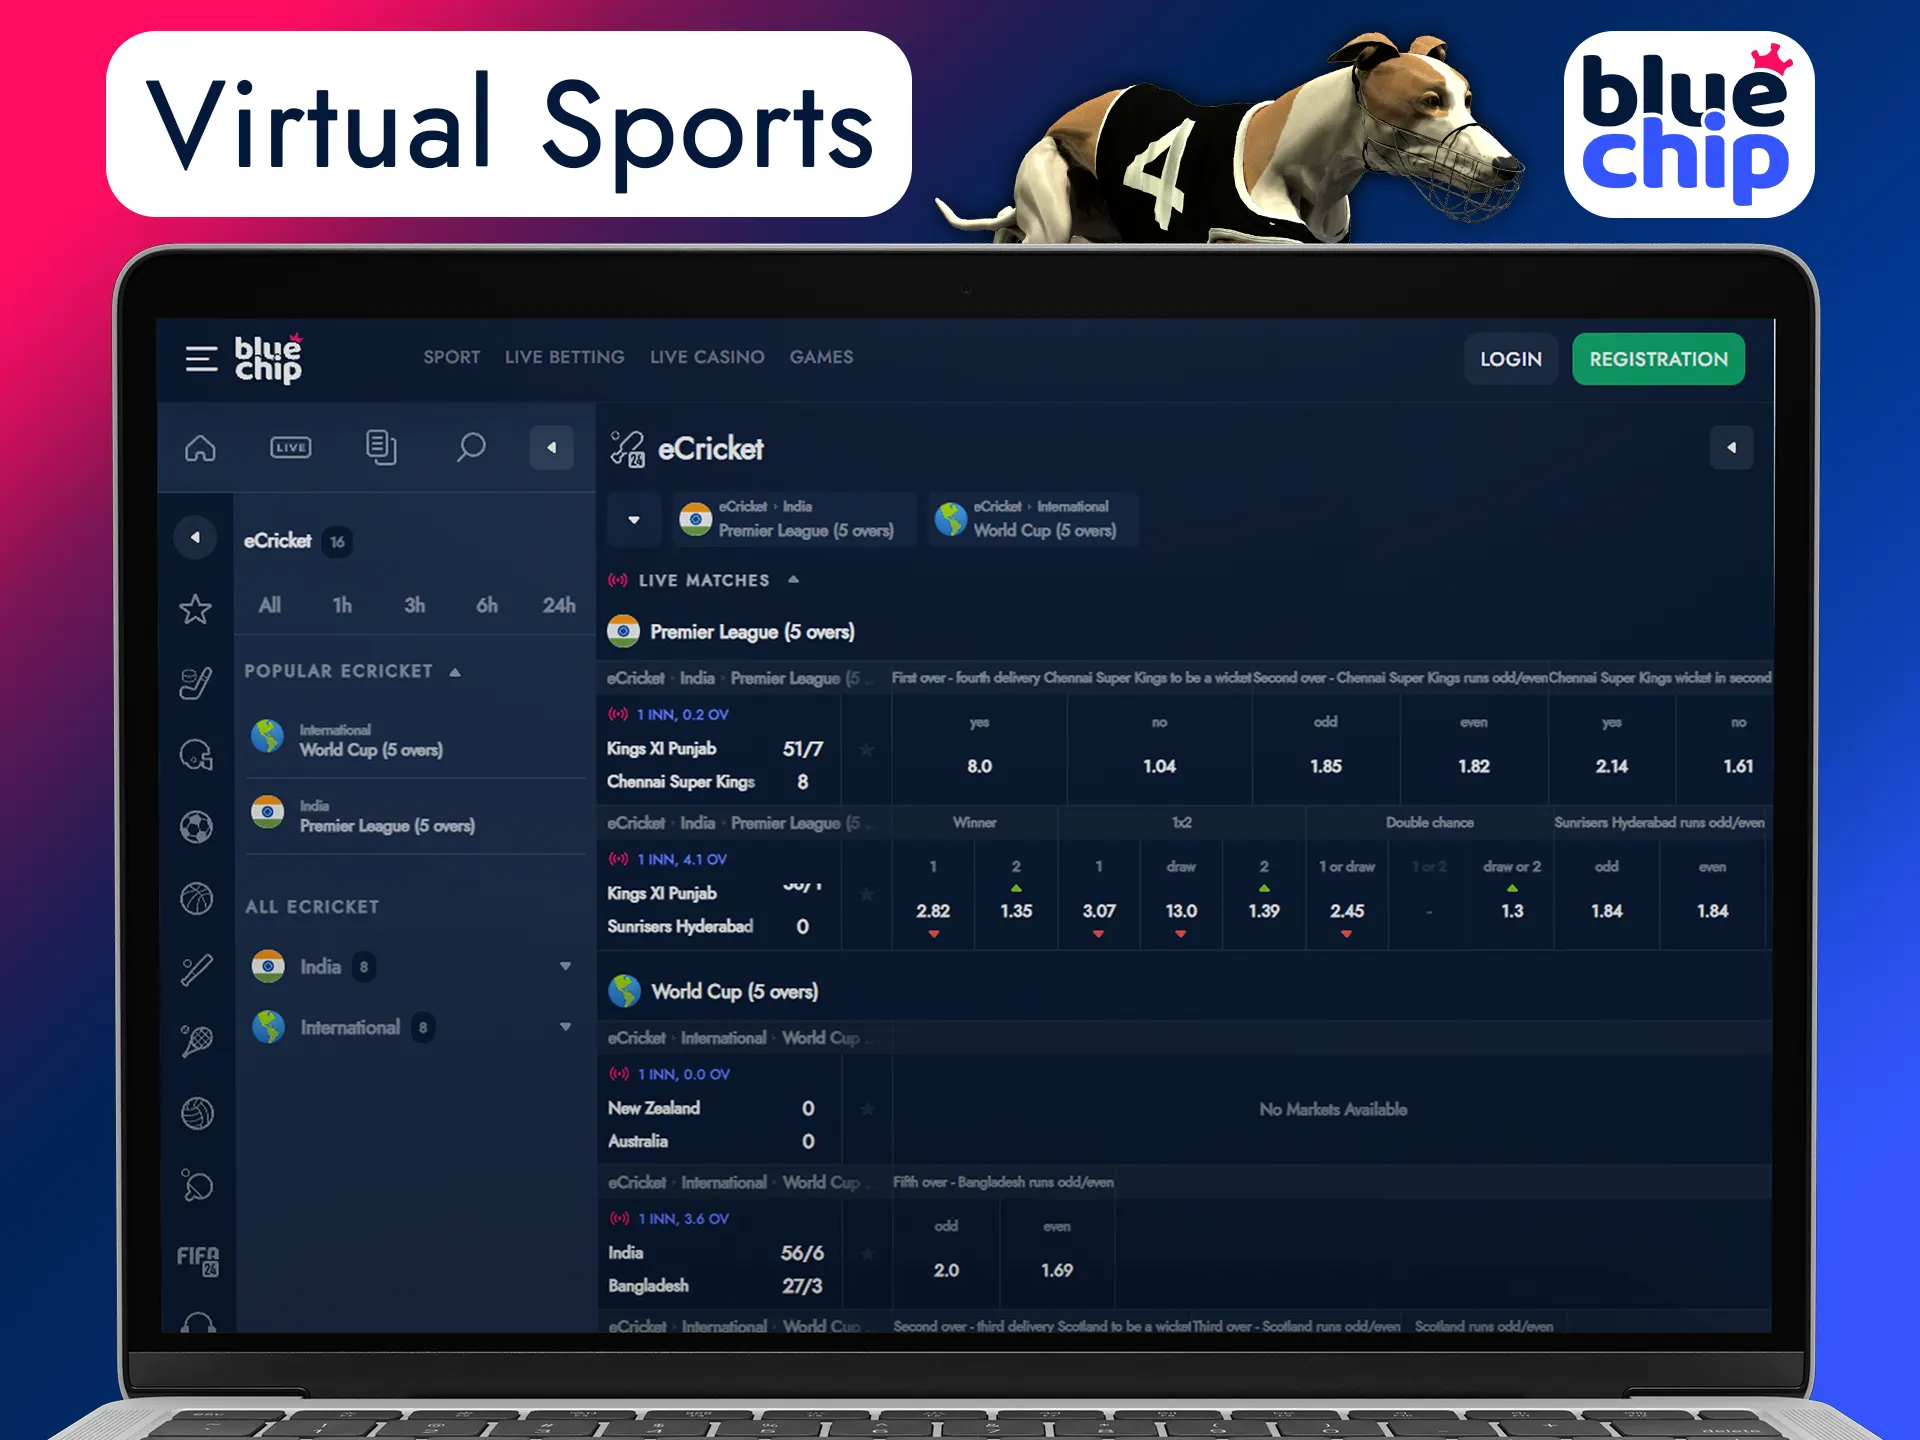 Bet on various of virtual sports at Bluechip.